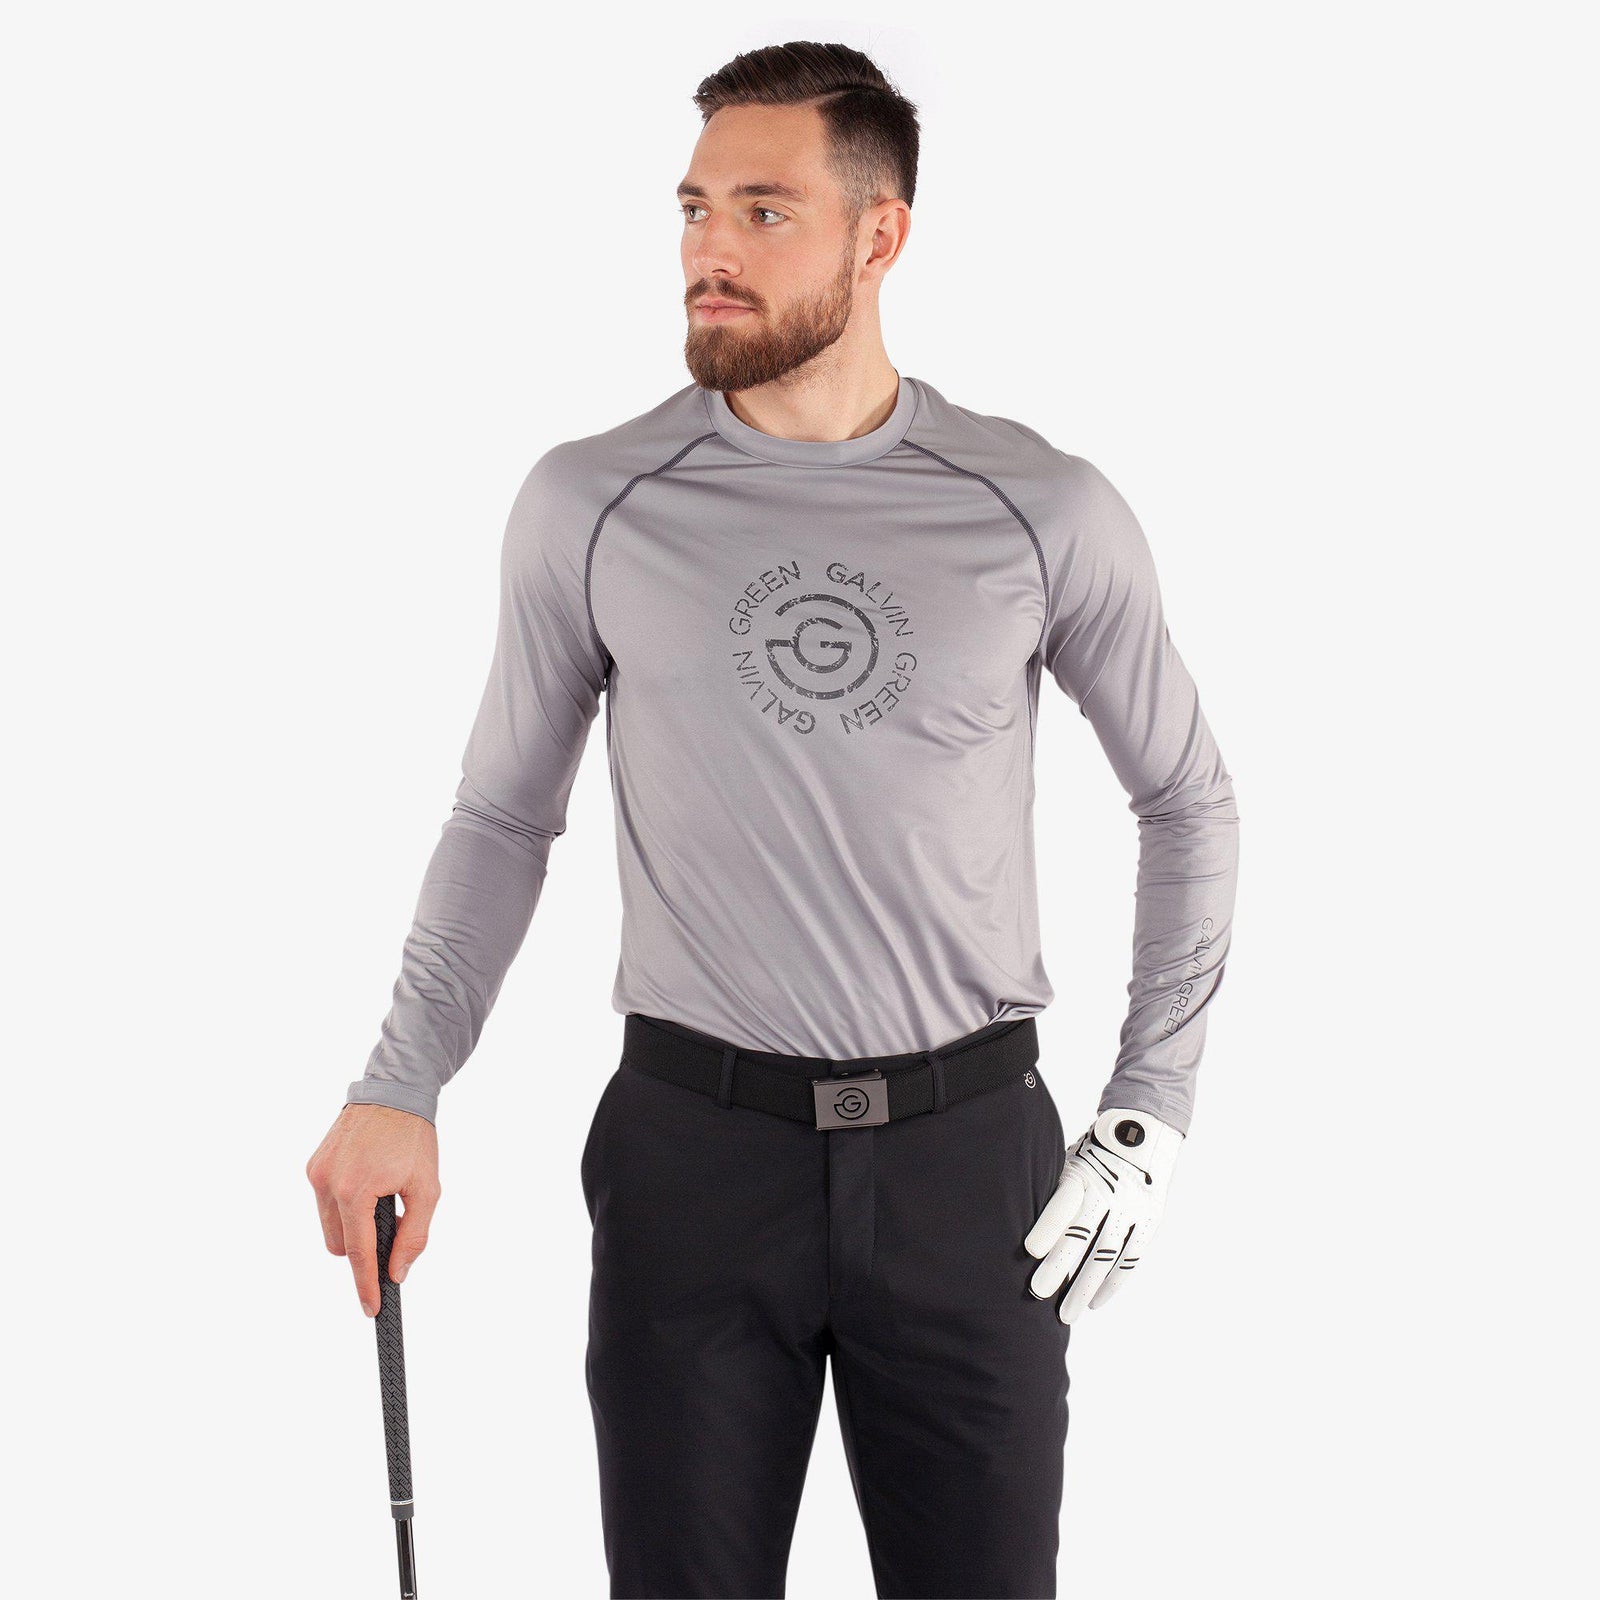 Enzo is a UV protection golf top for Men in the color Sharkskin/Granite Grey(1)